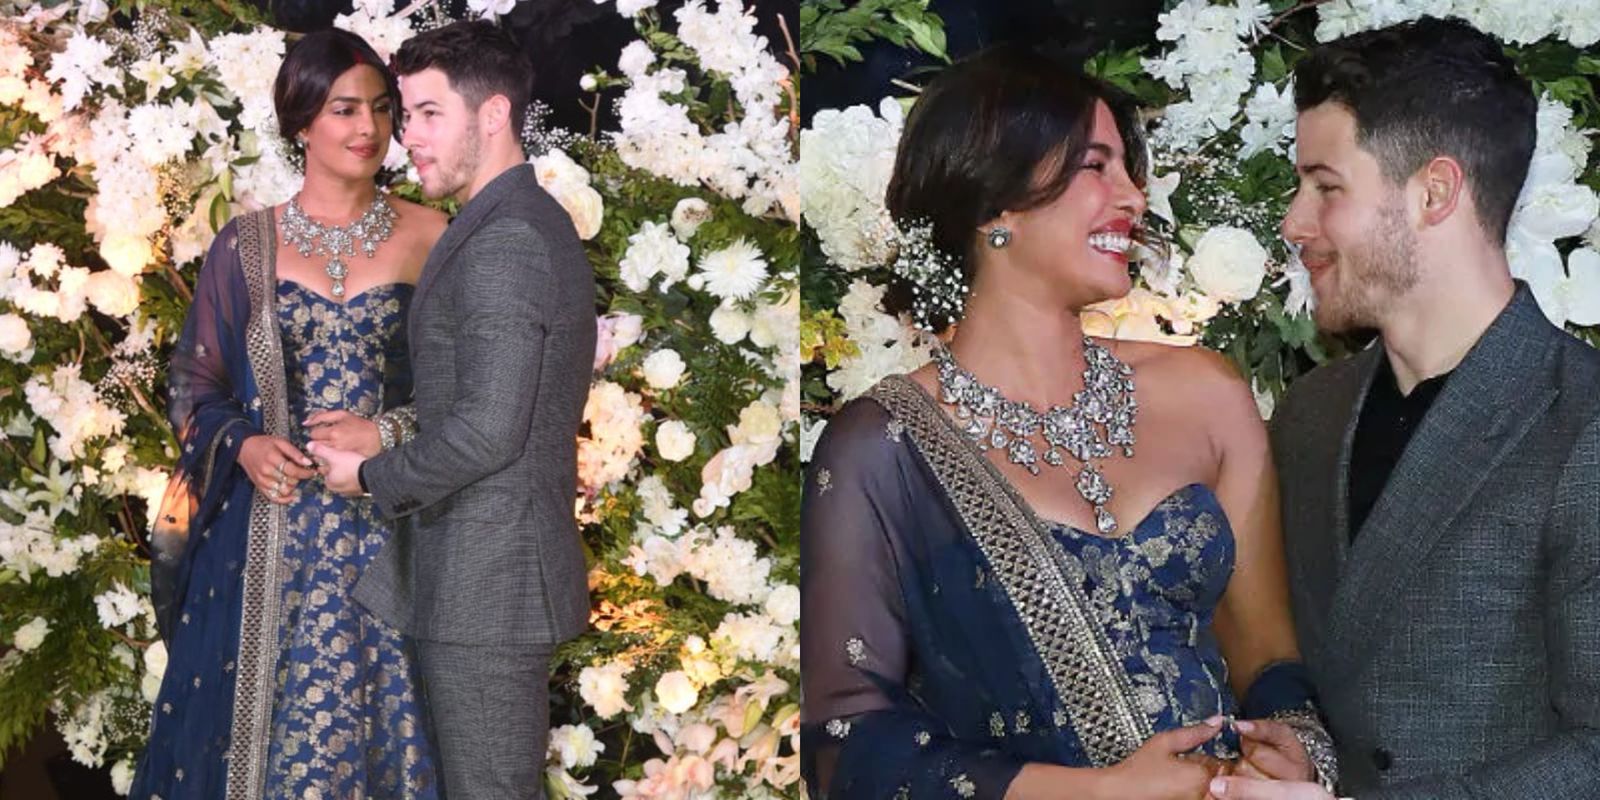 WATCH: Here's How Desi Girl Priyanka Chopra Introduced Husband Nick Jonas To The Guests At Their Reception!